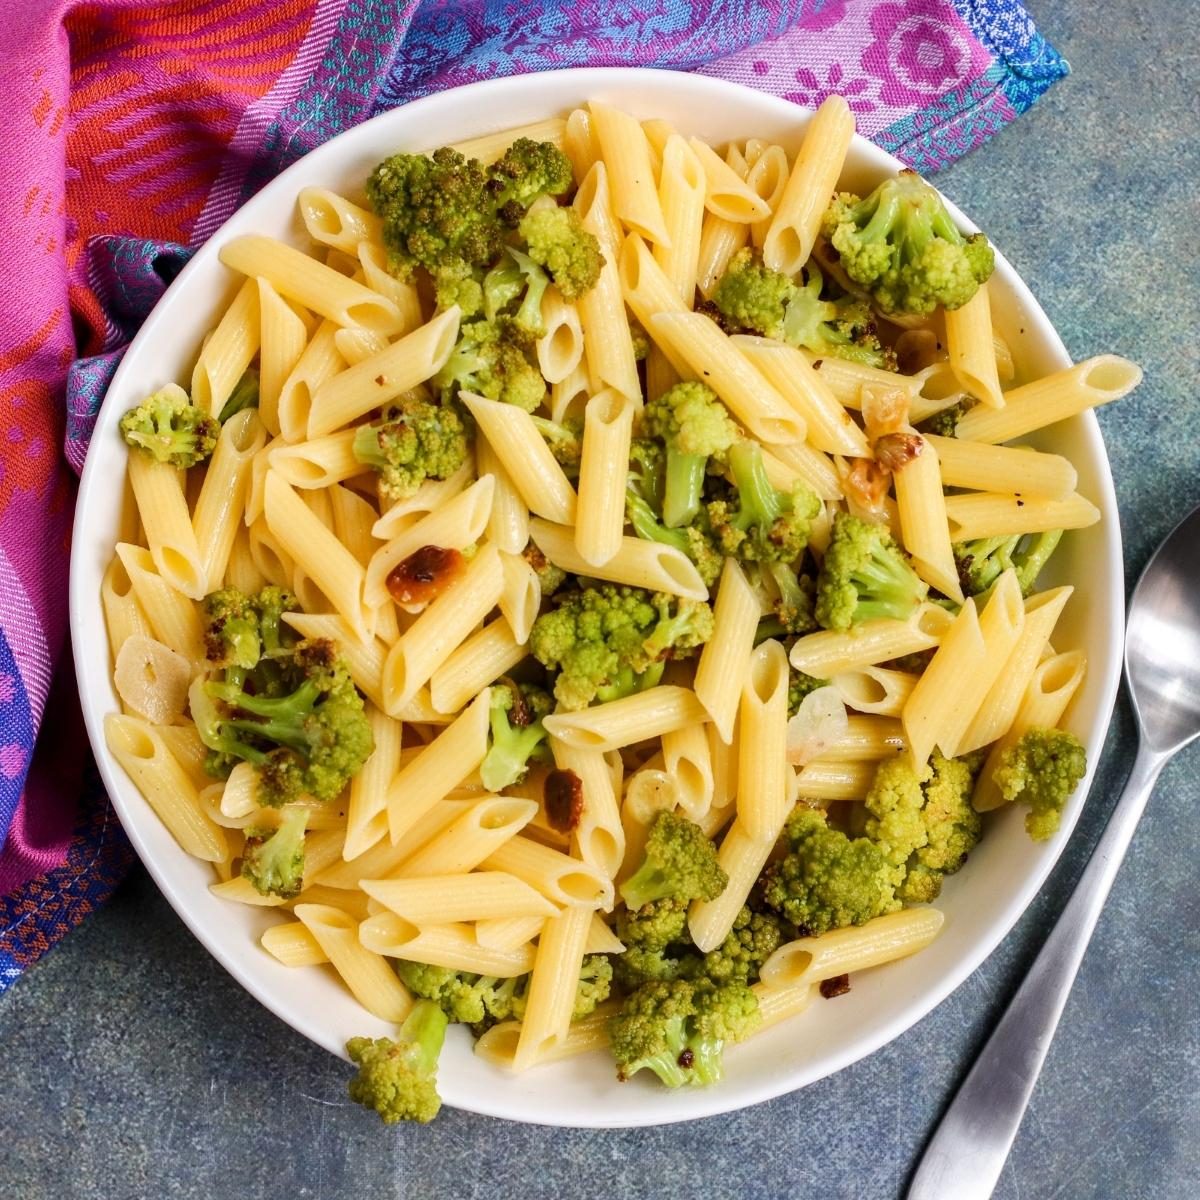 Bowl of penne pasta with roasted garlic and Romanesco florets.